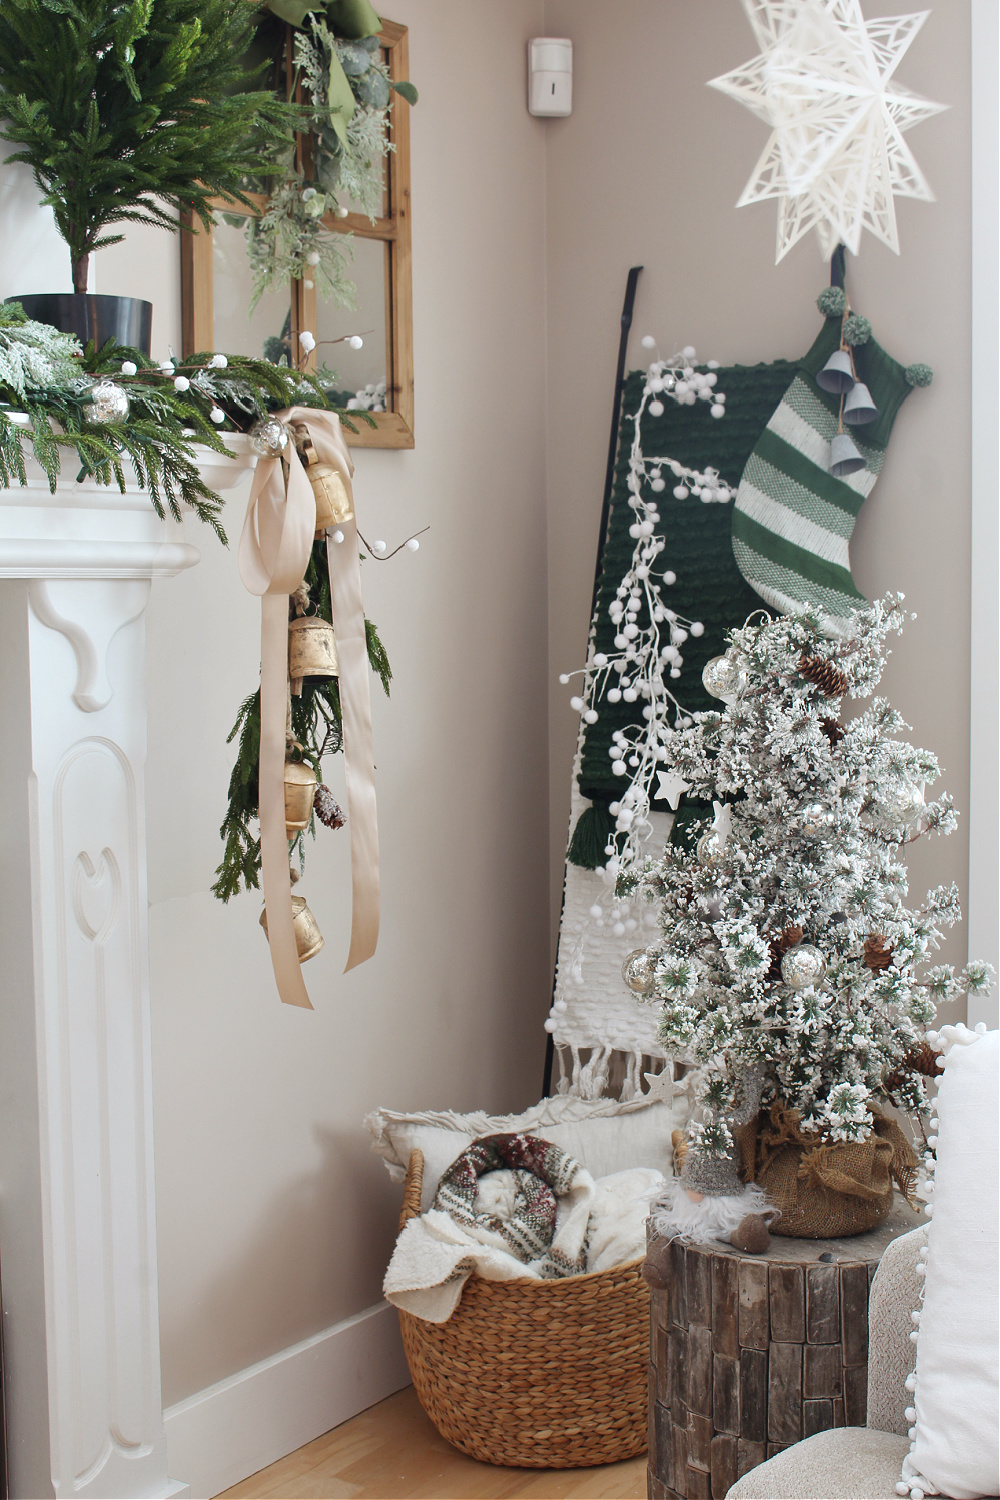 Blanket ladder in a green and white Christmas living room.